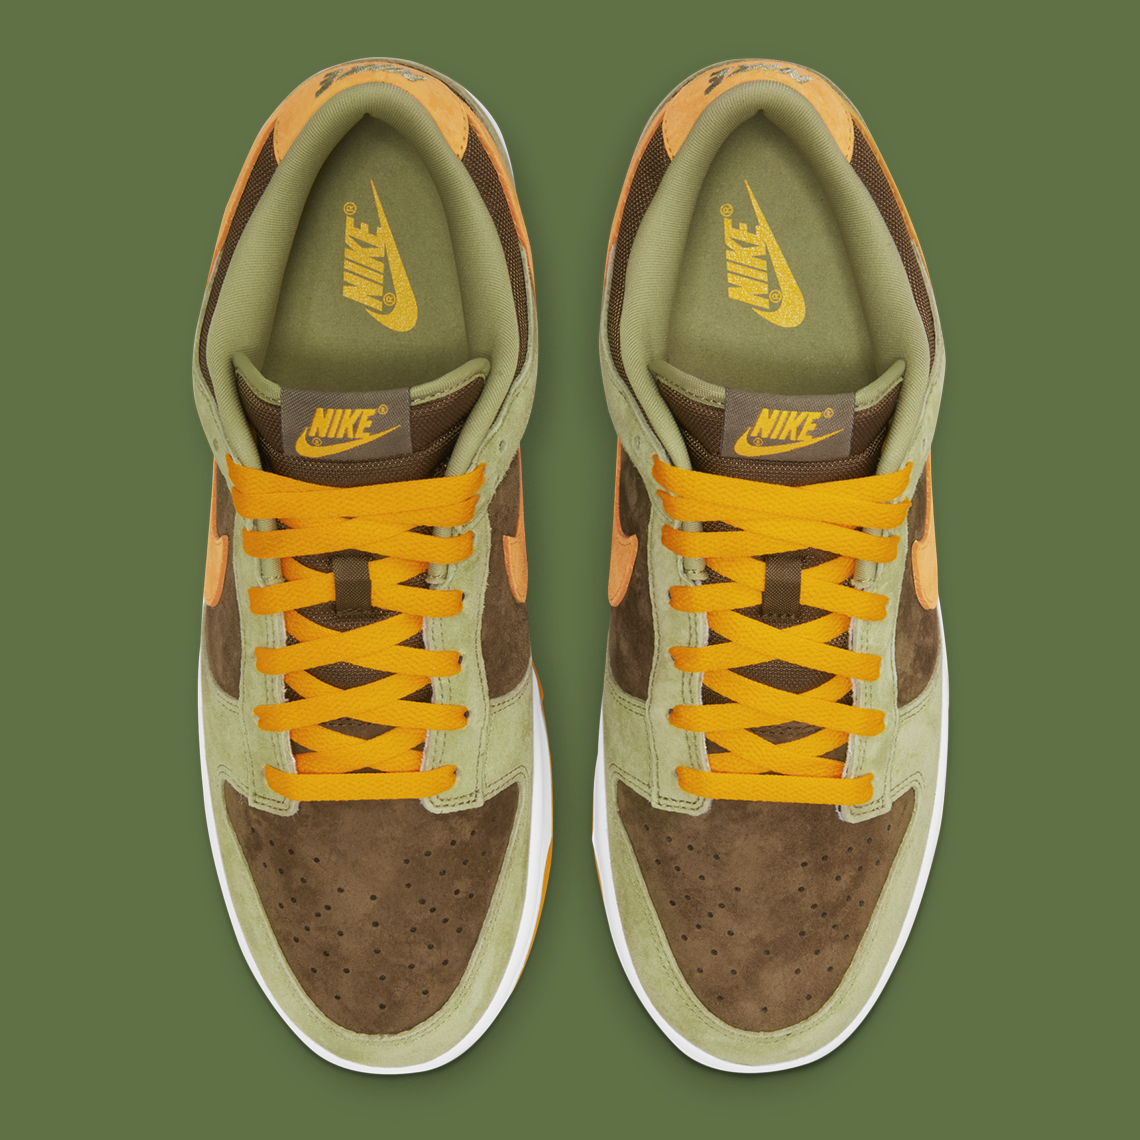 nike dunk low dusty olive DH5360 300 4